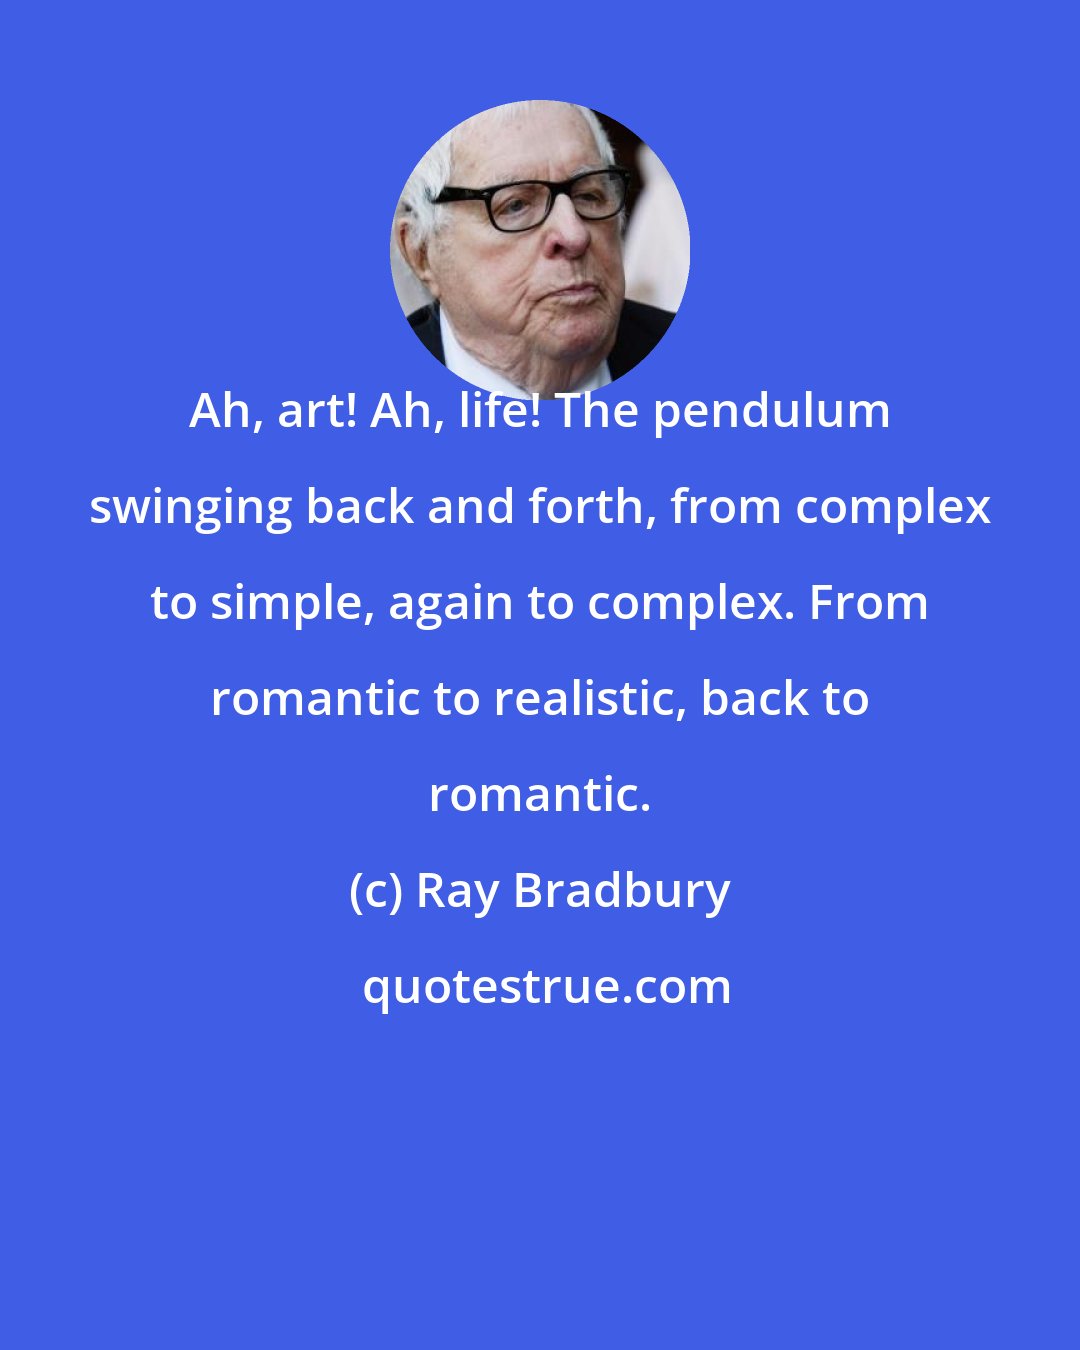 Ray Bradbury: Ah, art! Ah, life! The pendulum swinging back and forth, from complex to simple, again to complex. From romantic to realistic, back to romantic.